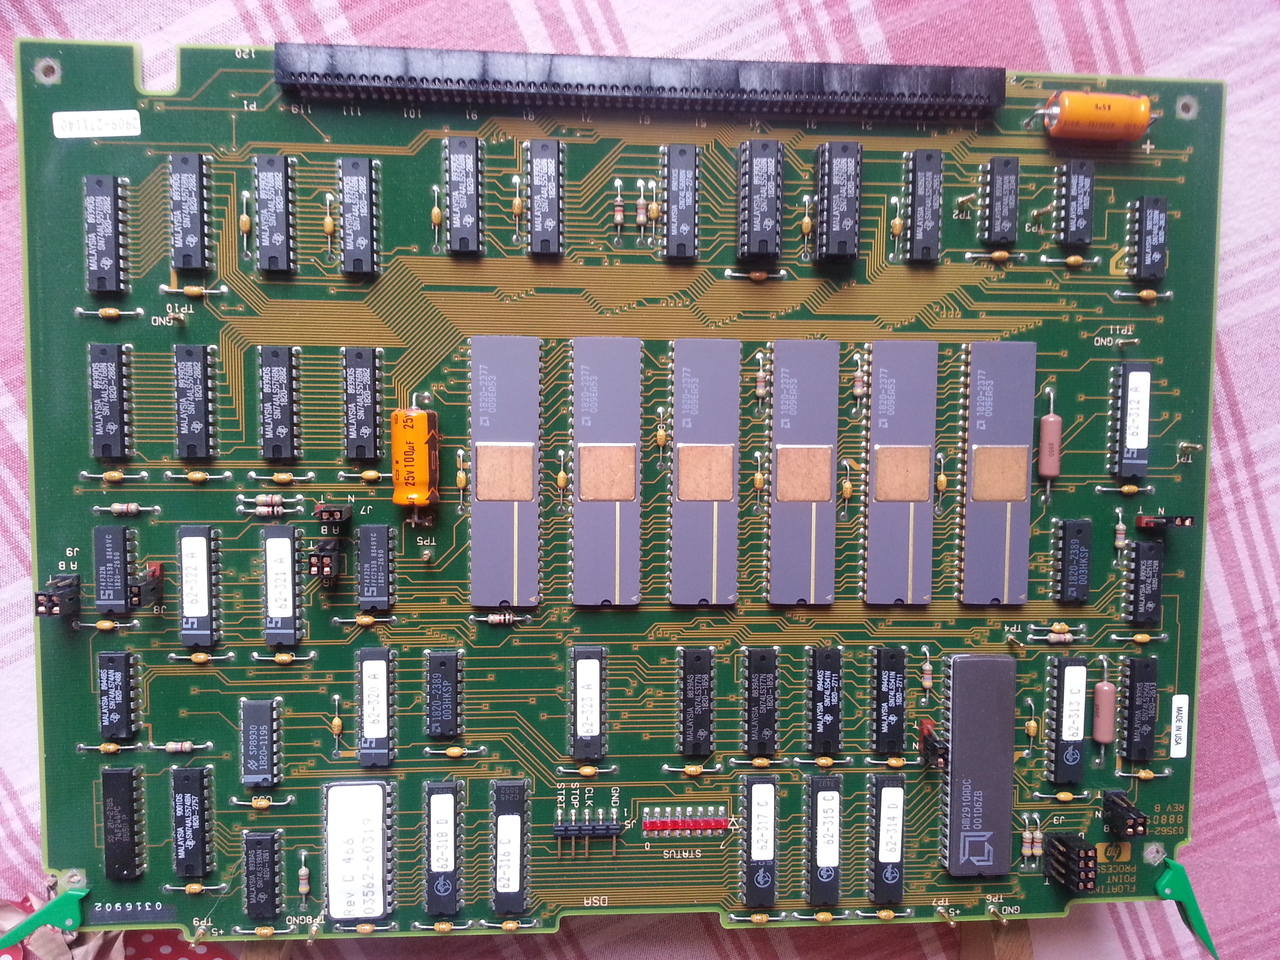 Picture of the A7 FPP board